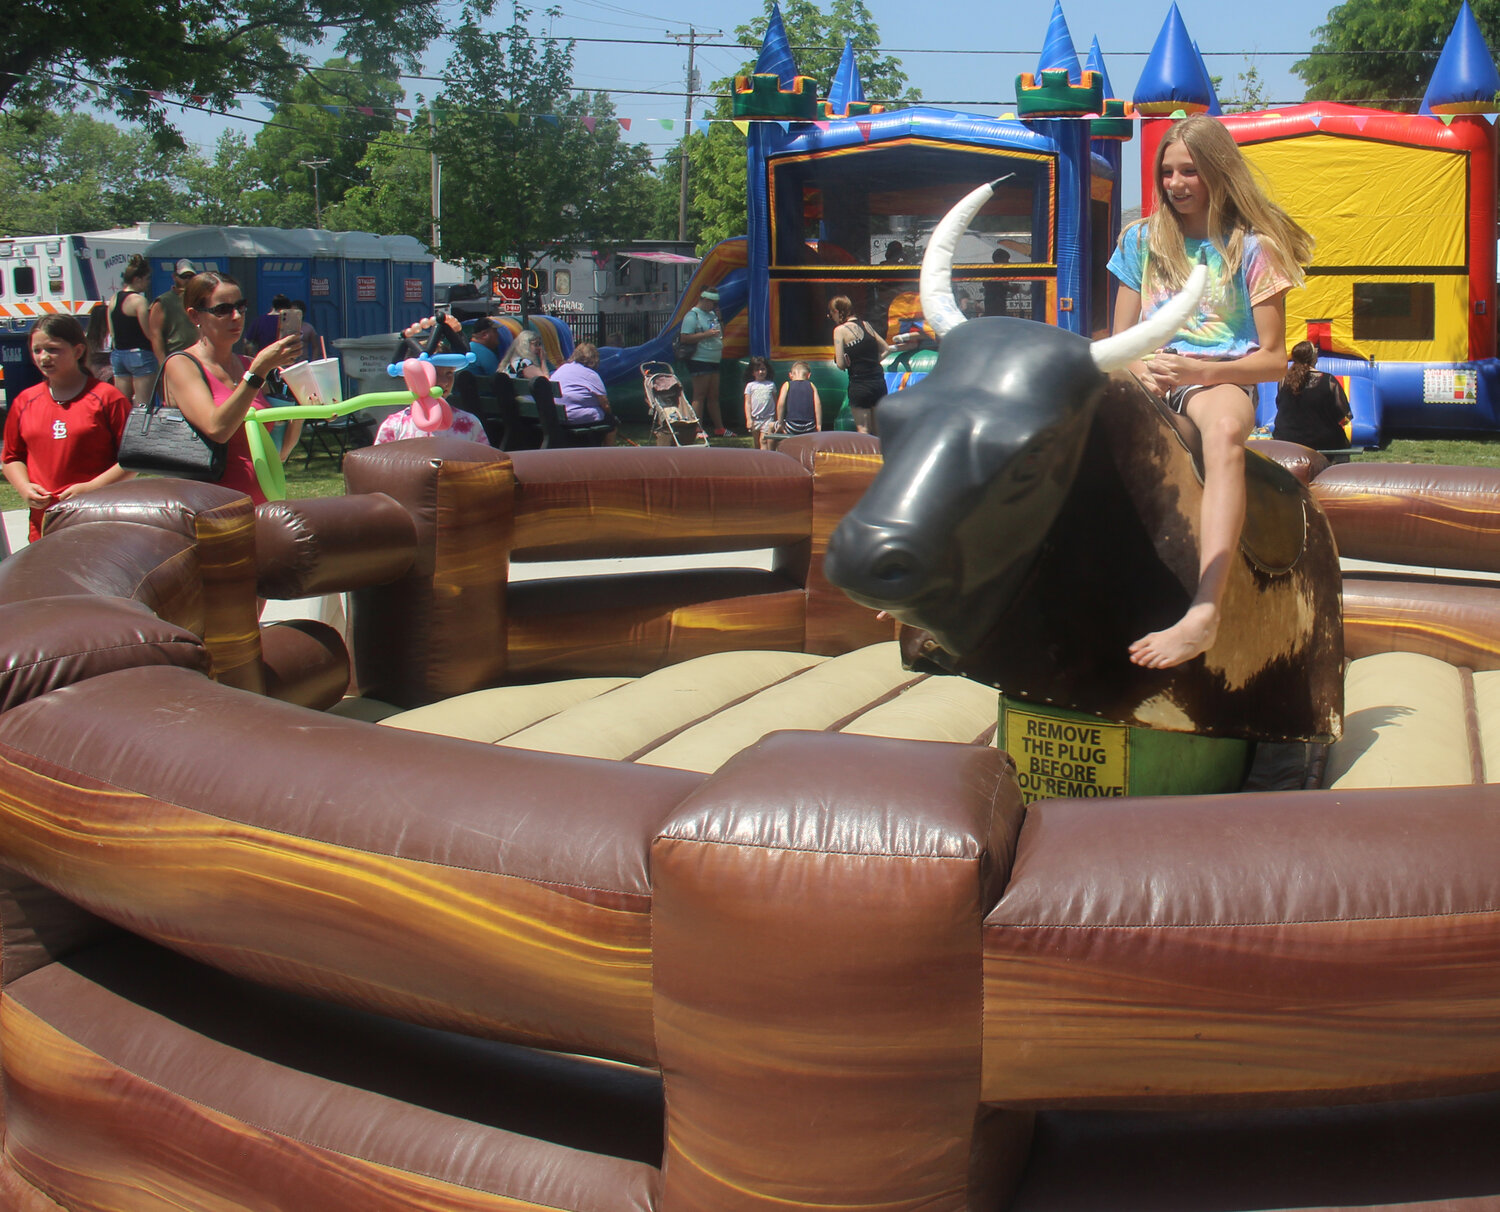 This young girl was one of several kids who tried out the mechanical bull at Summerfest.